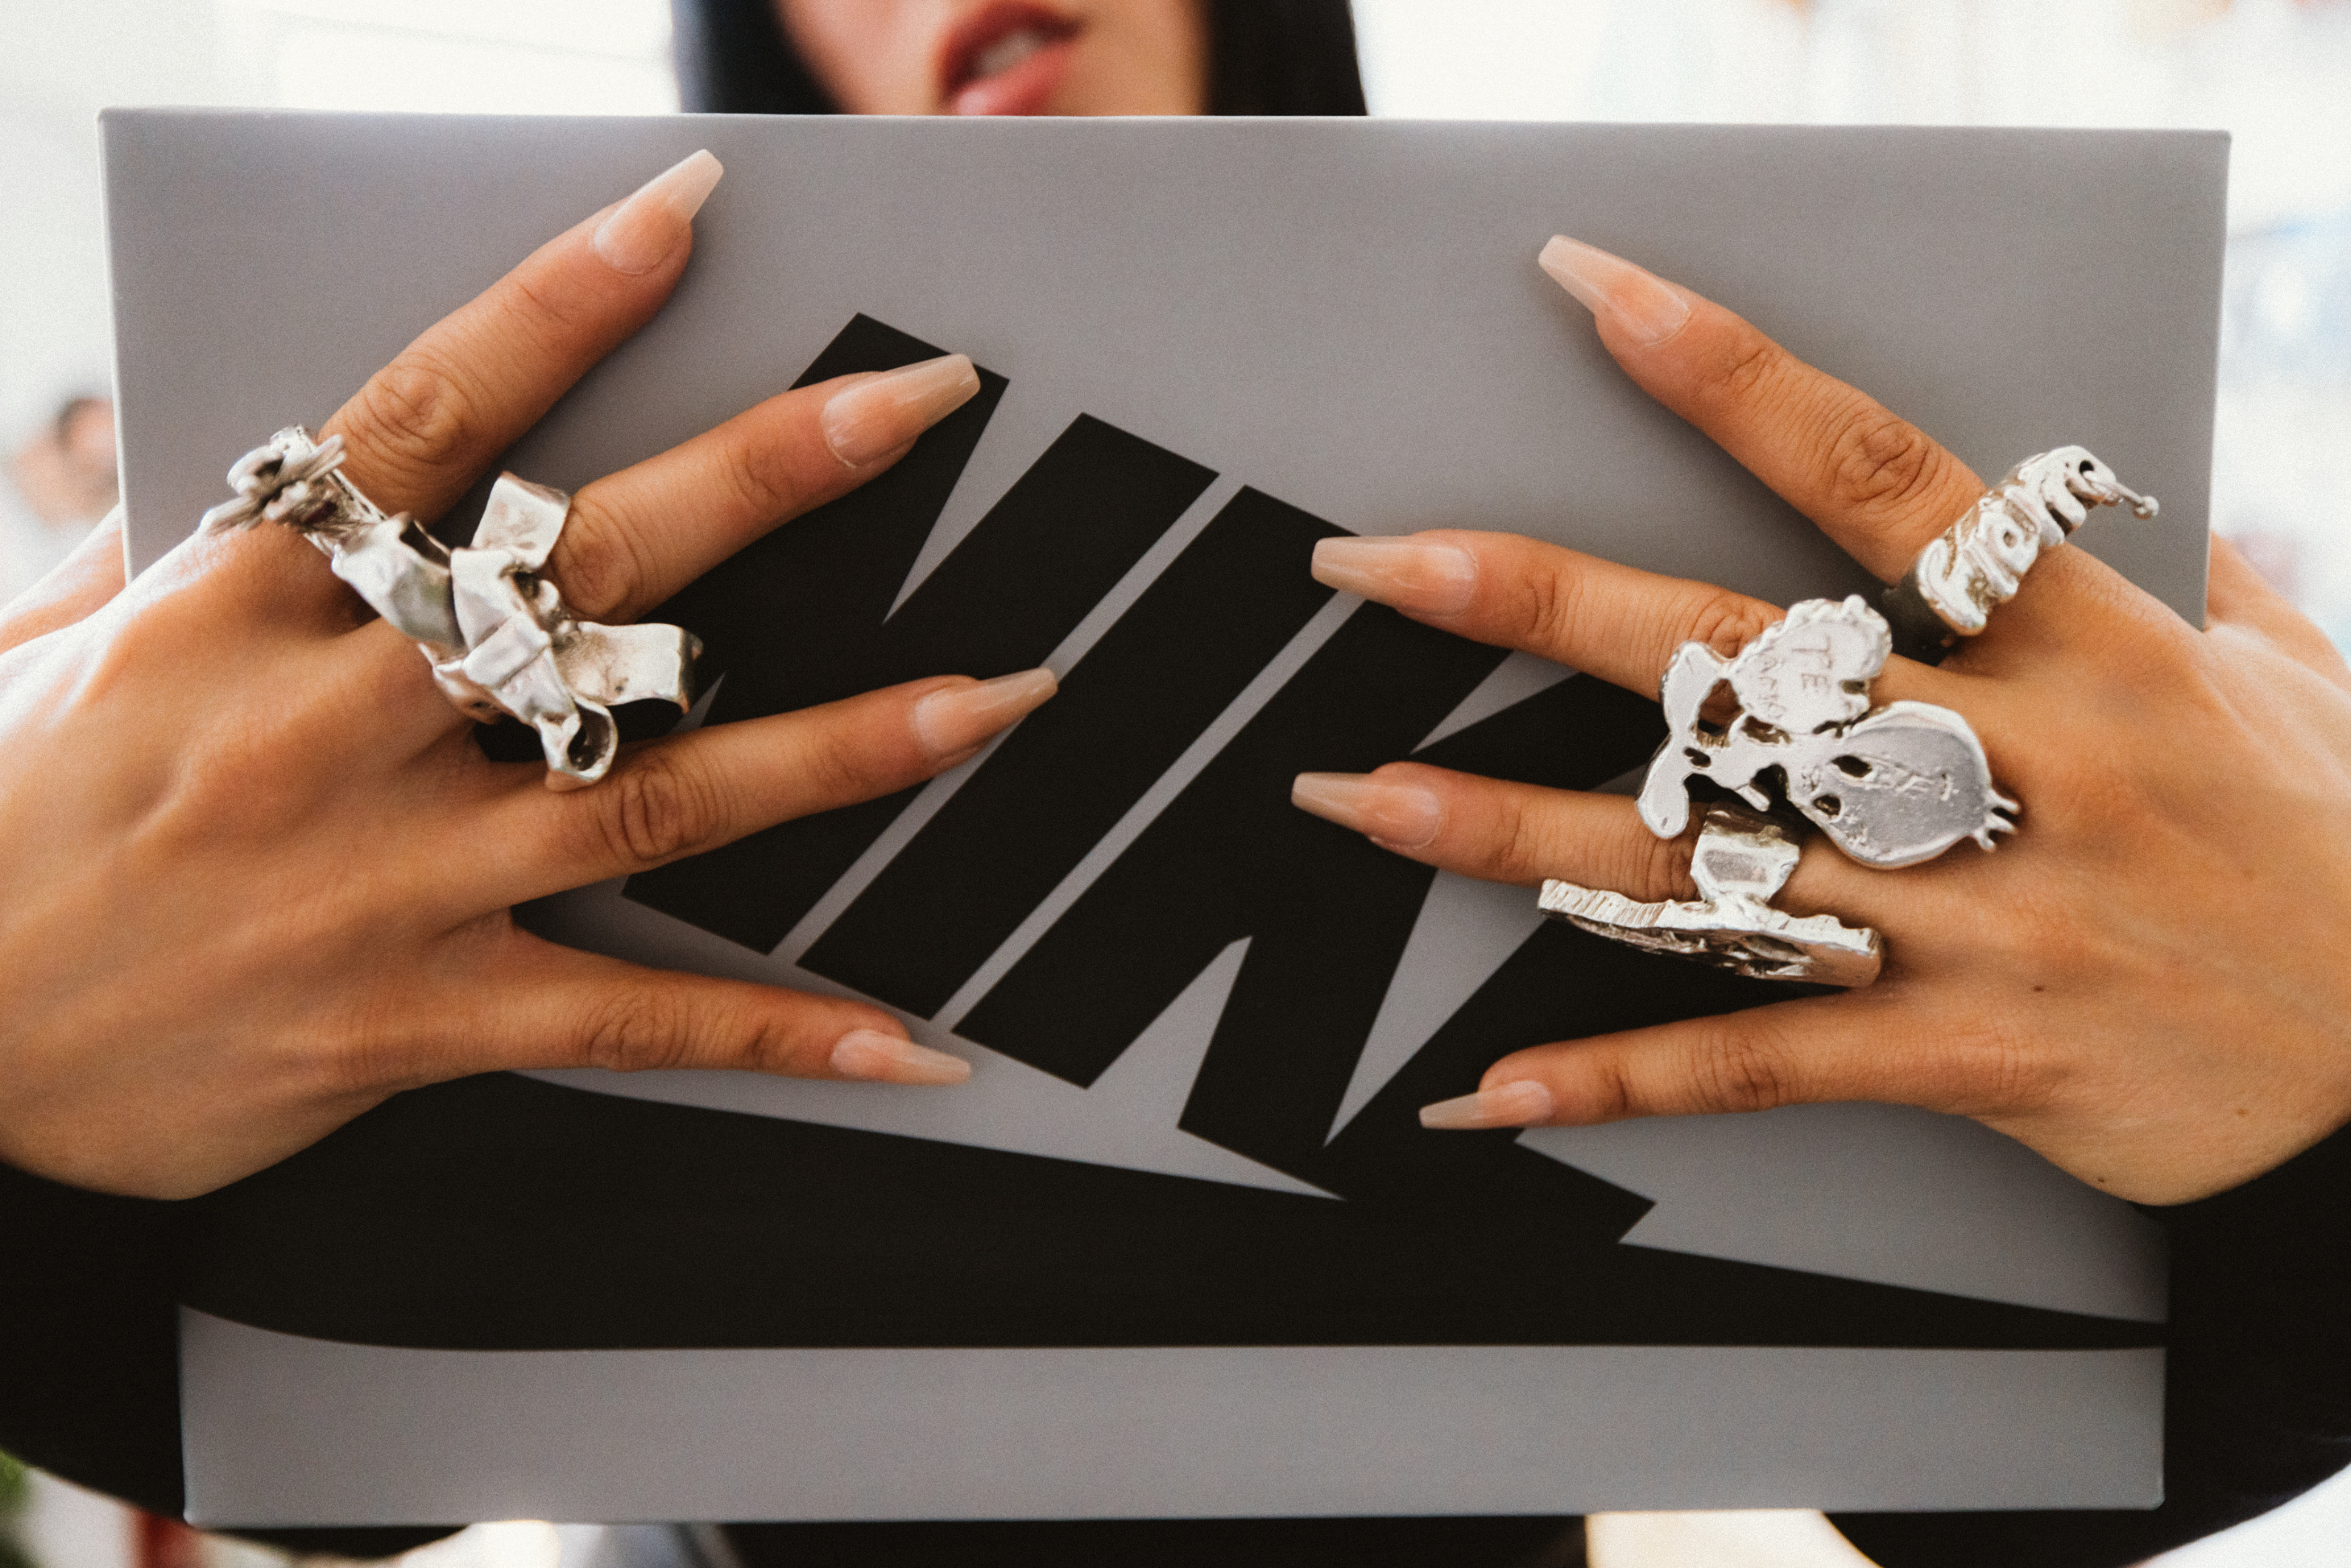 Close-up of hands holding a sneaker box with distinctive logo, adorned with silver rings including skull designs